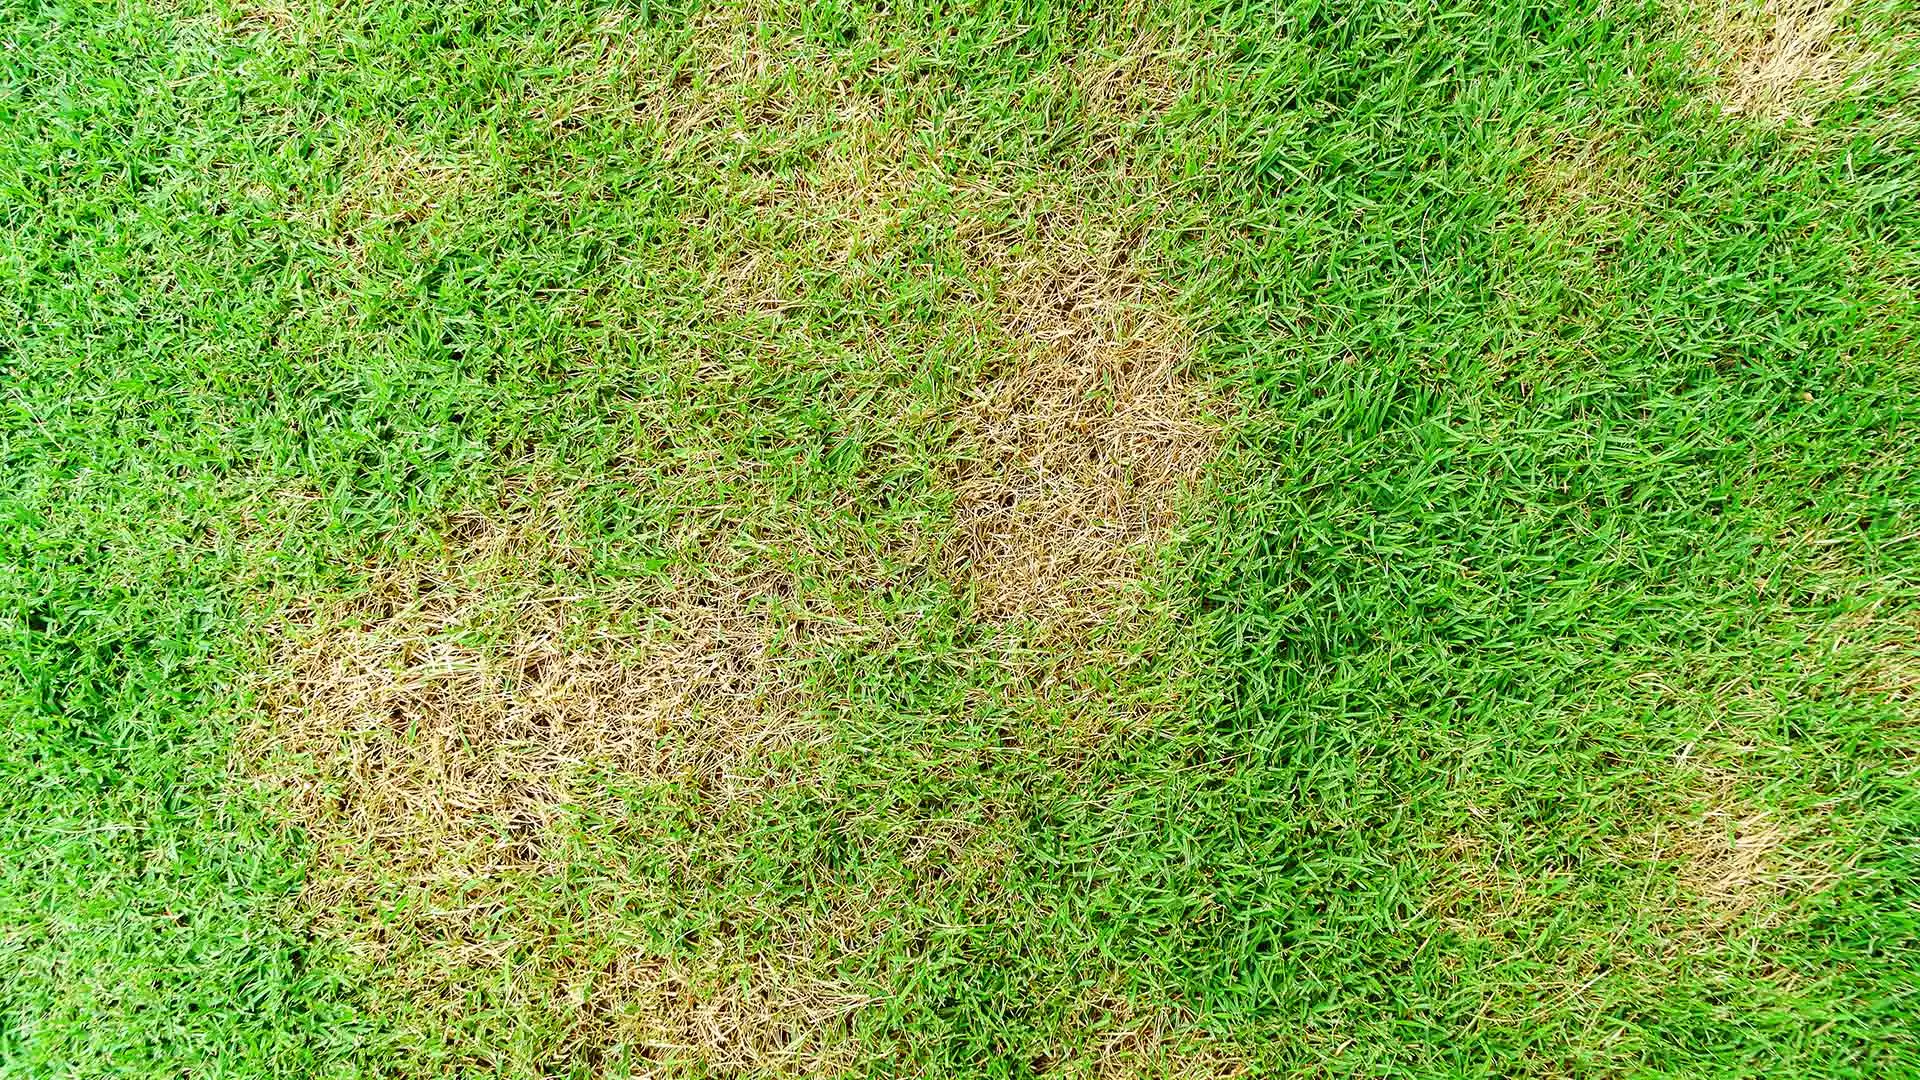 Brown patches spread throughout lawn in Nashville, TN.